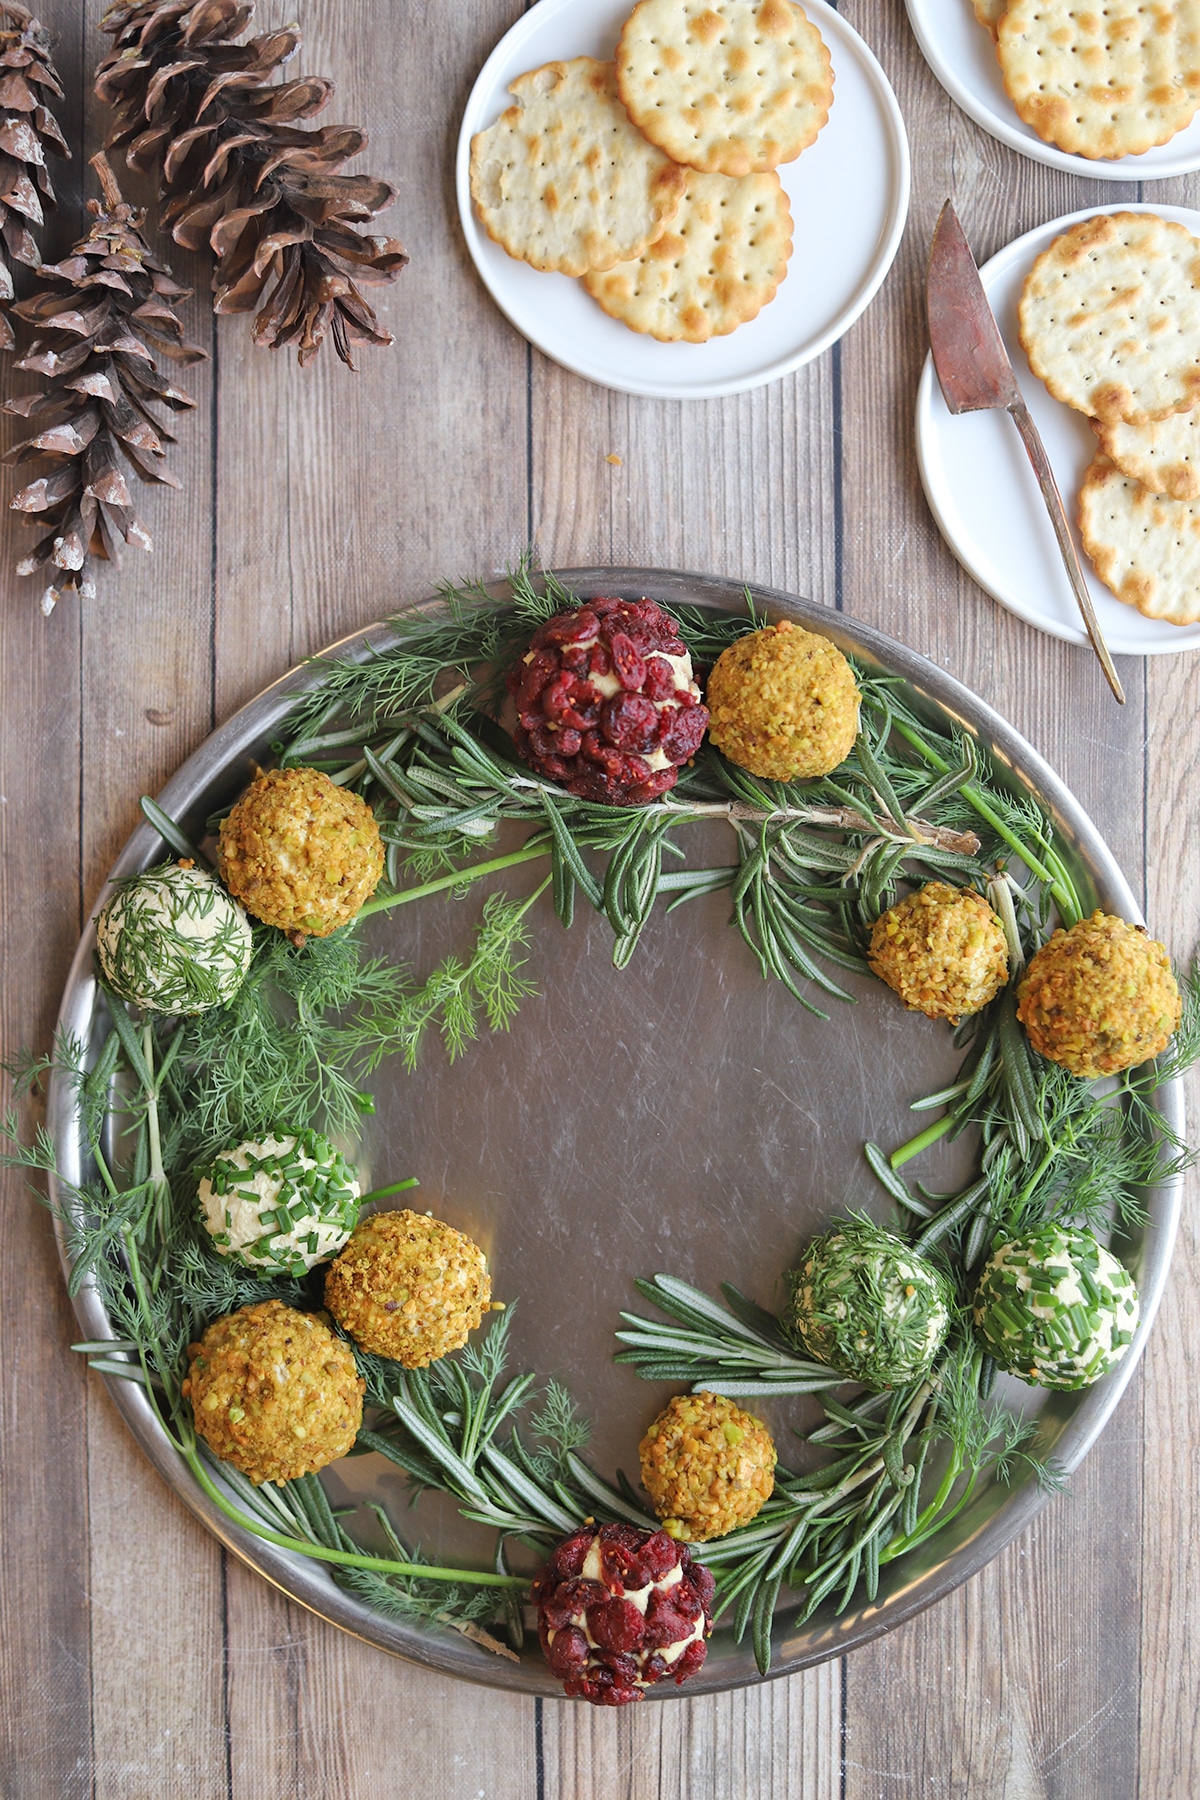 Wreath platter lined with tofu cheese balls on dill & rosemary.